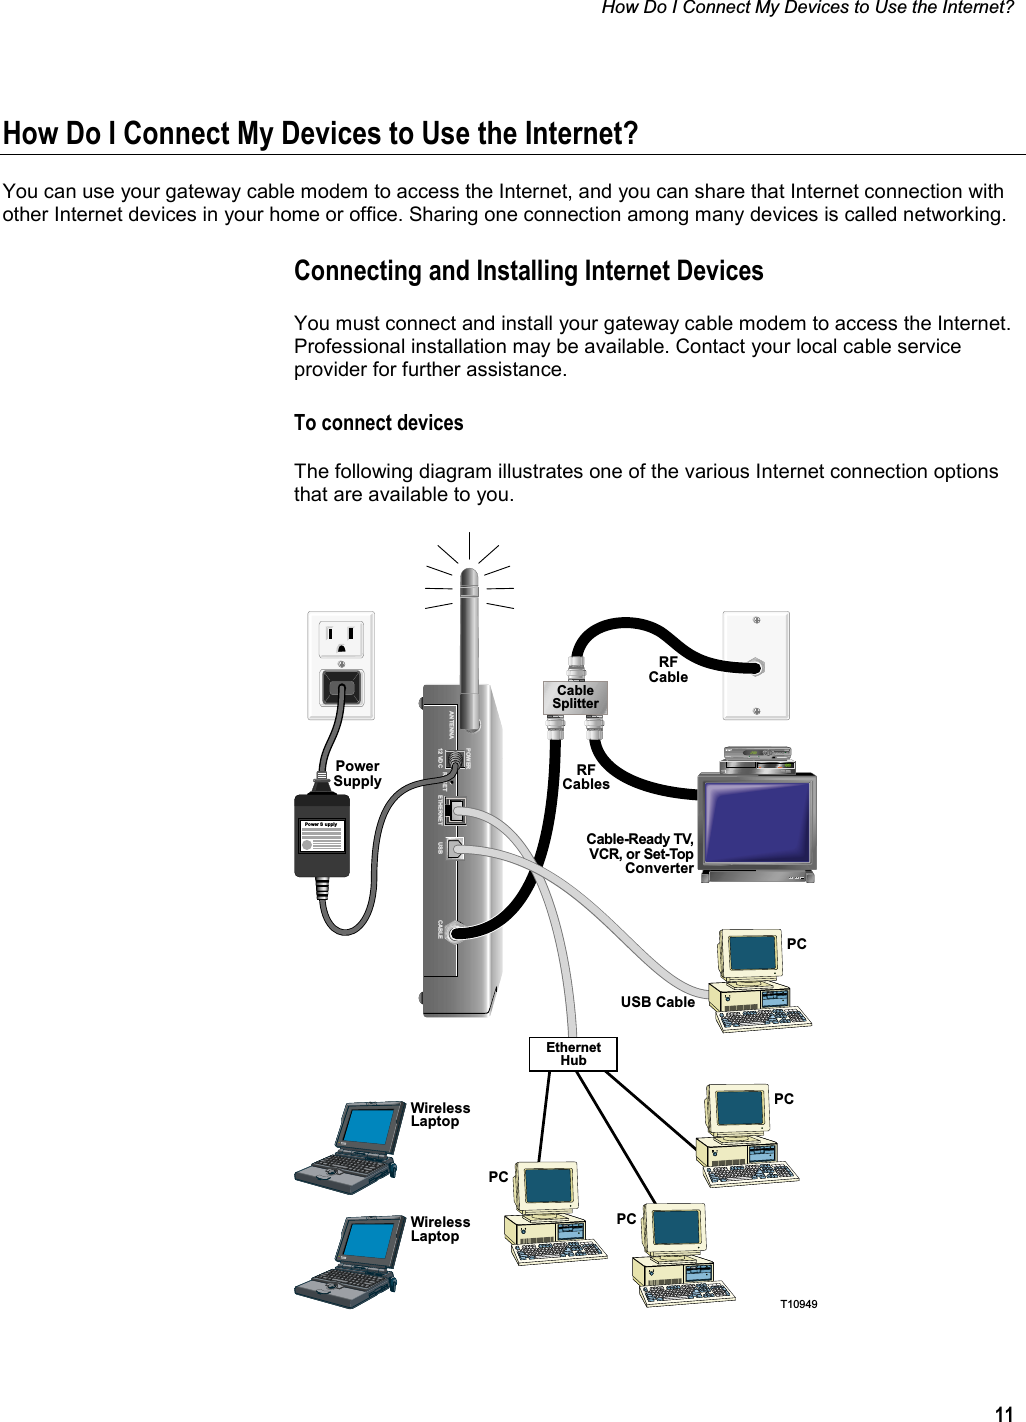 How Do I Connect My Devices to Use the Internet? 11How Do I Connect My Devices to Use the Internet? You can use your gateway cable modem to access the Internet, and you can share that Internet connection with other Internet devices in your home or office. Sharing one connection among many devices is called networking.  Connecting and Installing Internet Devices You must connect and install your gateway cable modem to access the Internet. Professional installation may be available. Contact your local cable service provider for further assistance. To connect devices The following diagram illustrates one of the various Internet connection options that are available to you. POWERANTENNA12 VDC RESET ETHERNET CABLEUSBPowerSupplyCable-Ready TV, VCR, or Set-TopConverterPCUSB CableRFCableRFCablesCableSplitterT10949Power SupplyBYPASSVOLñVOL+CH+CHñMENU GUIDE INFO A/B POWEREthernetHubPCPCWirelessLaptopPCWirelessLaptop